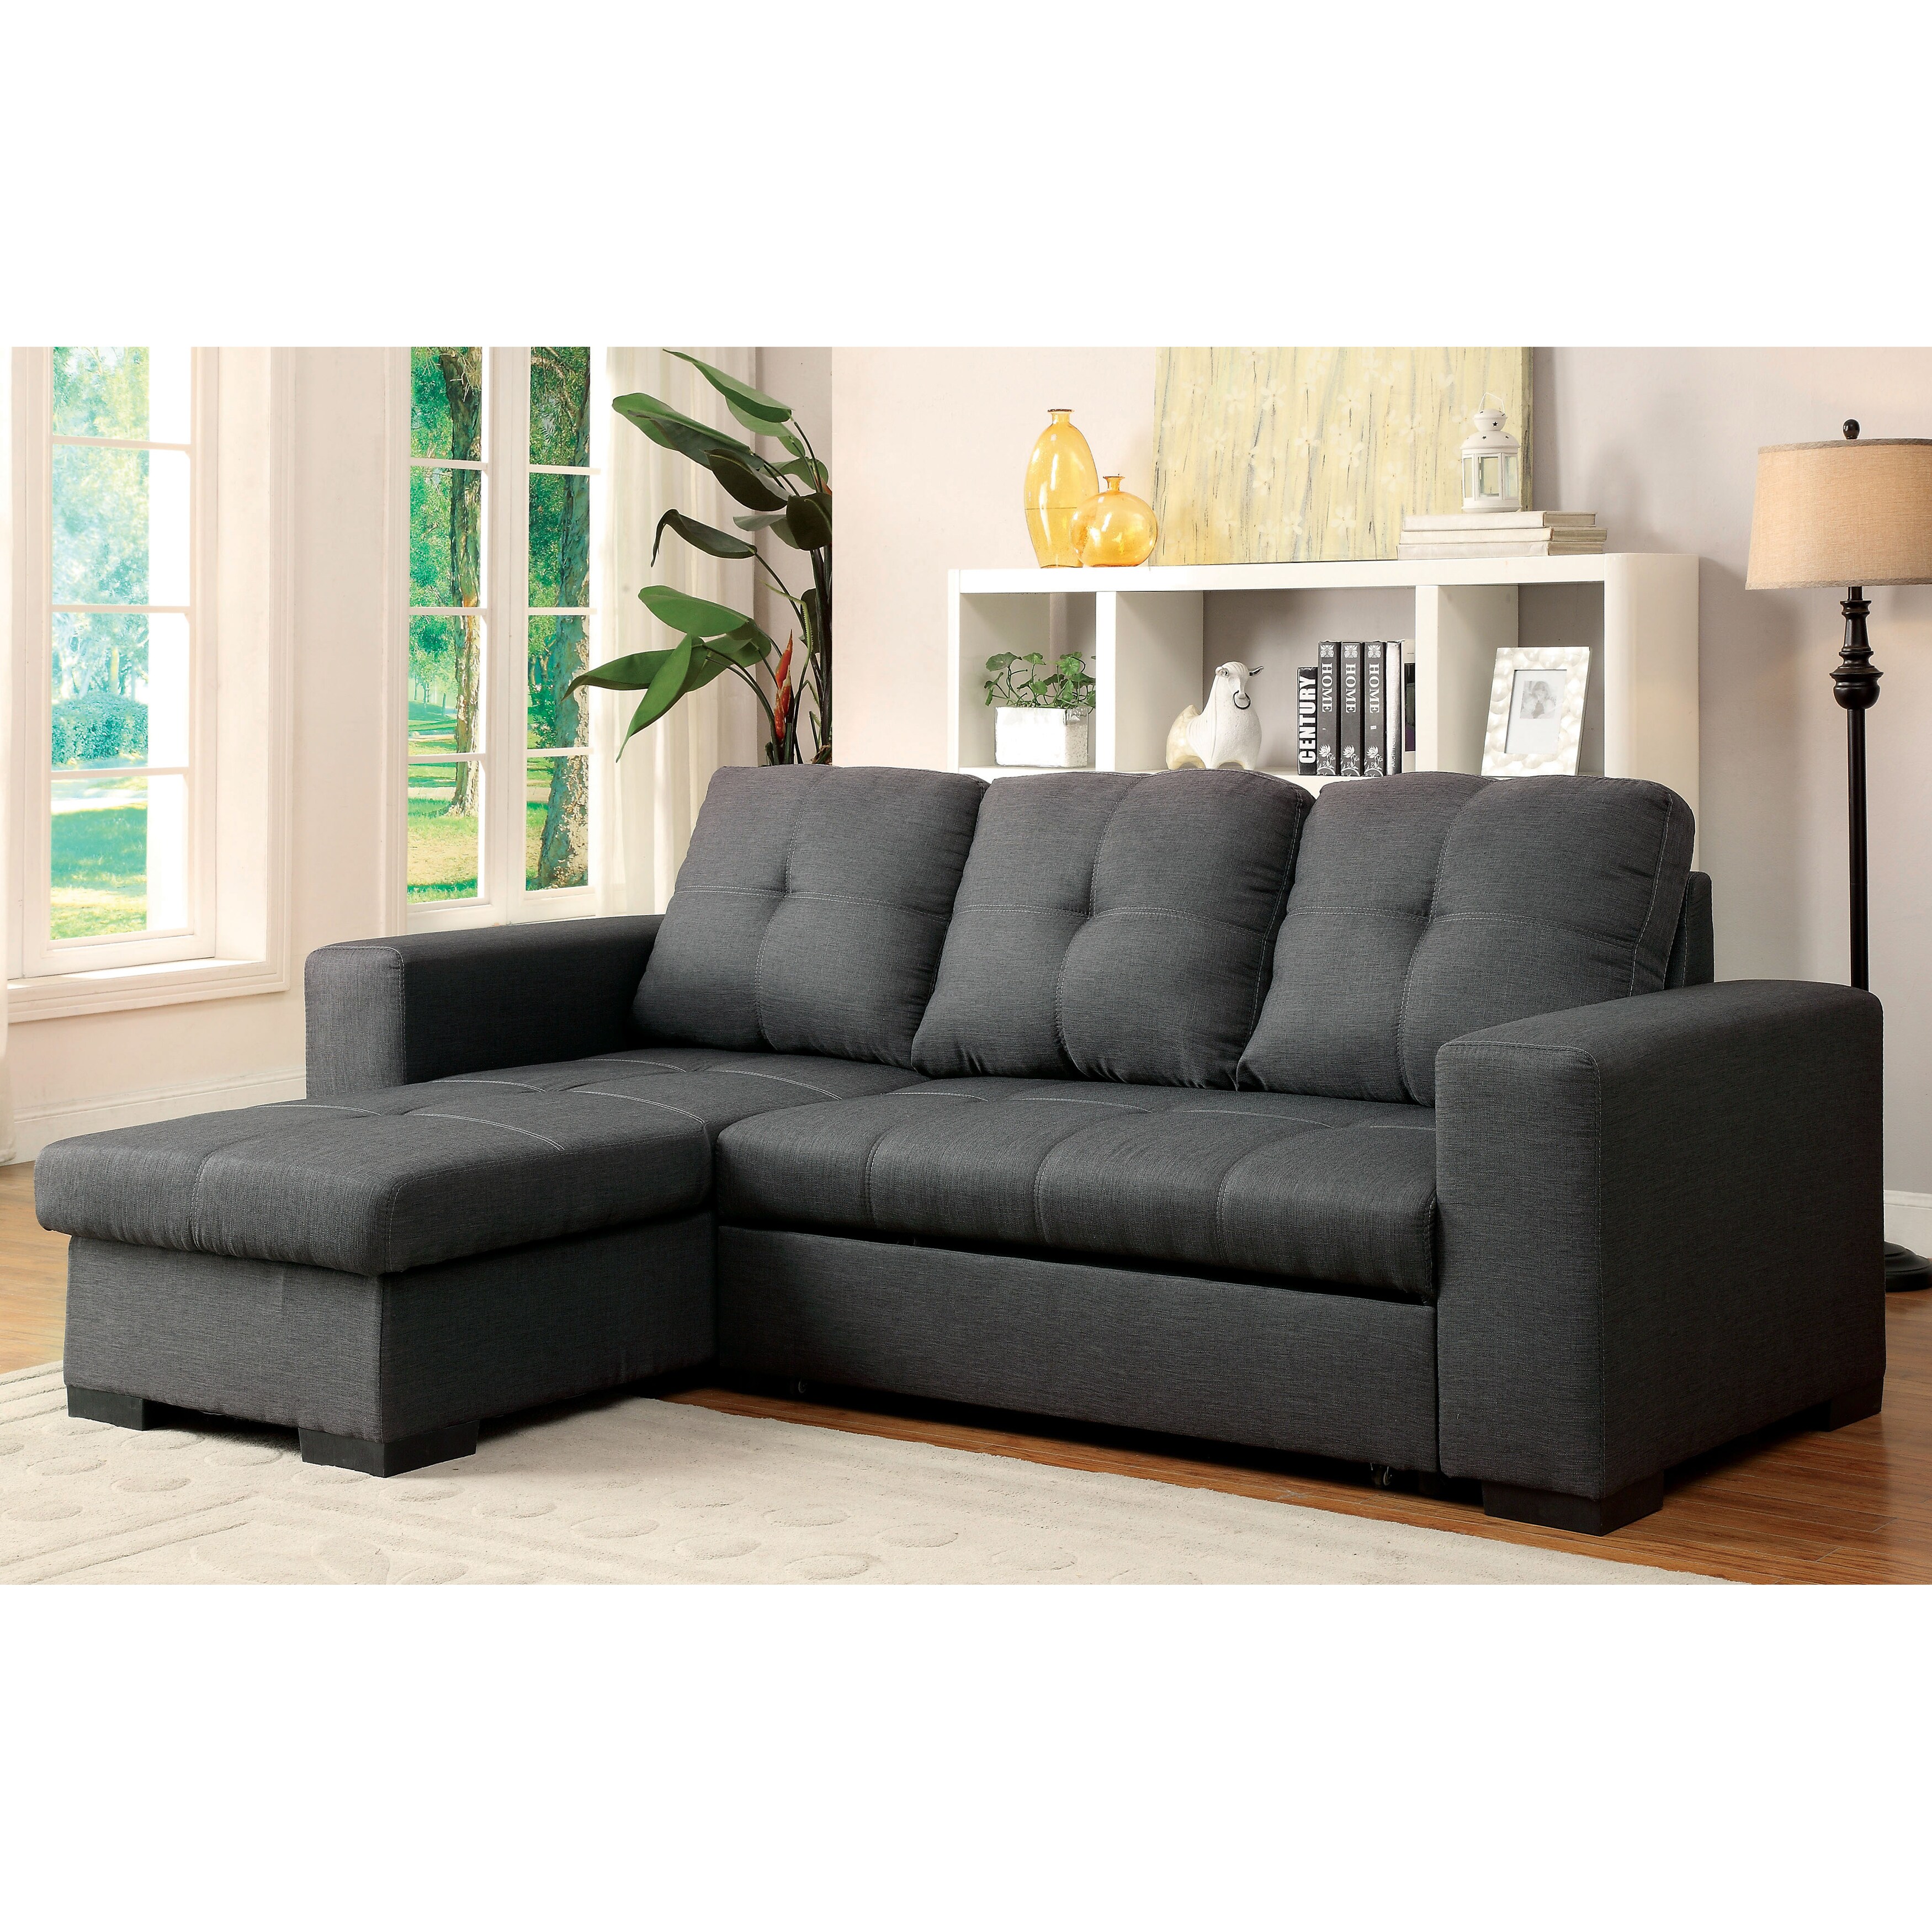 Furniture of America Margeaux 2-piece Sleeper Storage Sectional Sofas